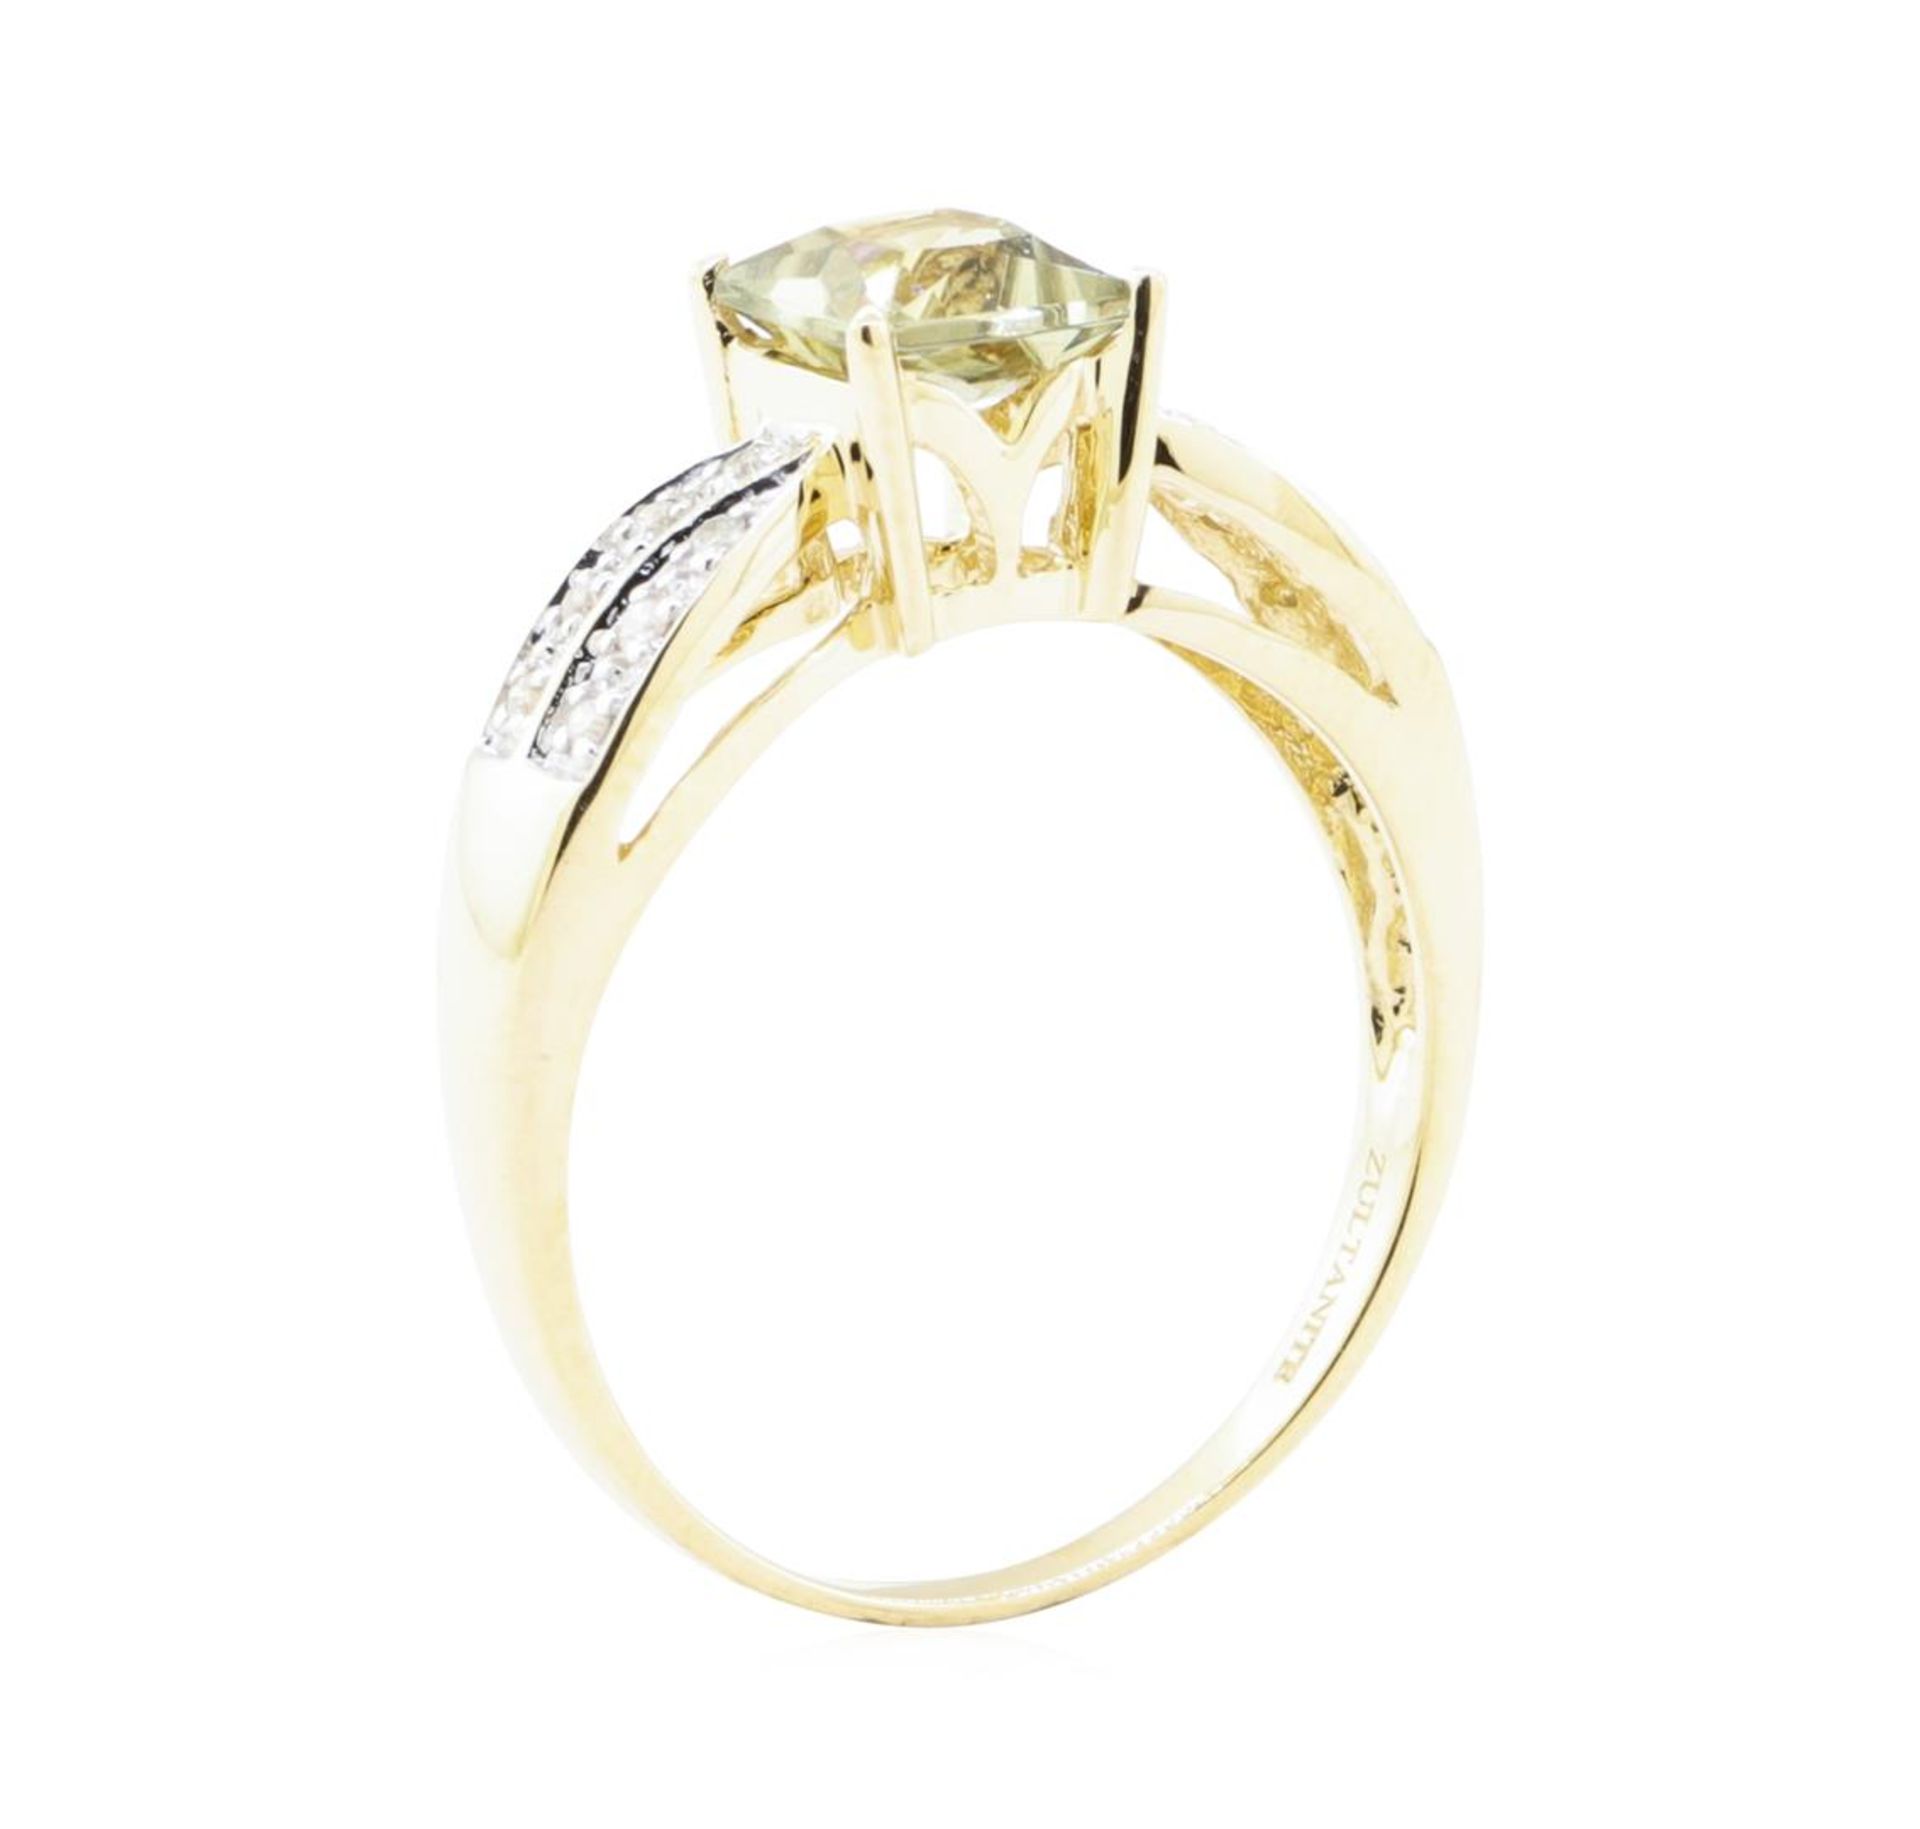 2.12 ctw Zultanite And Diamond Ring - 14KT Yellow Gold - Image 4 of 5